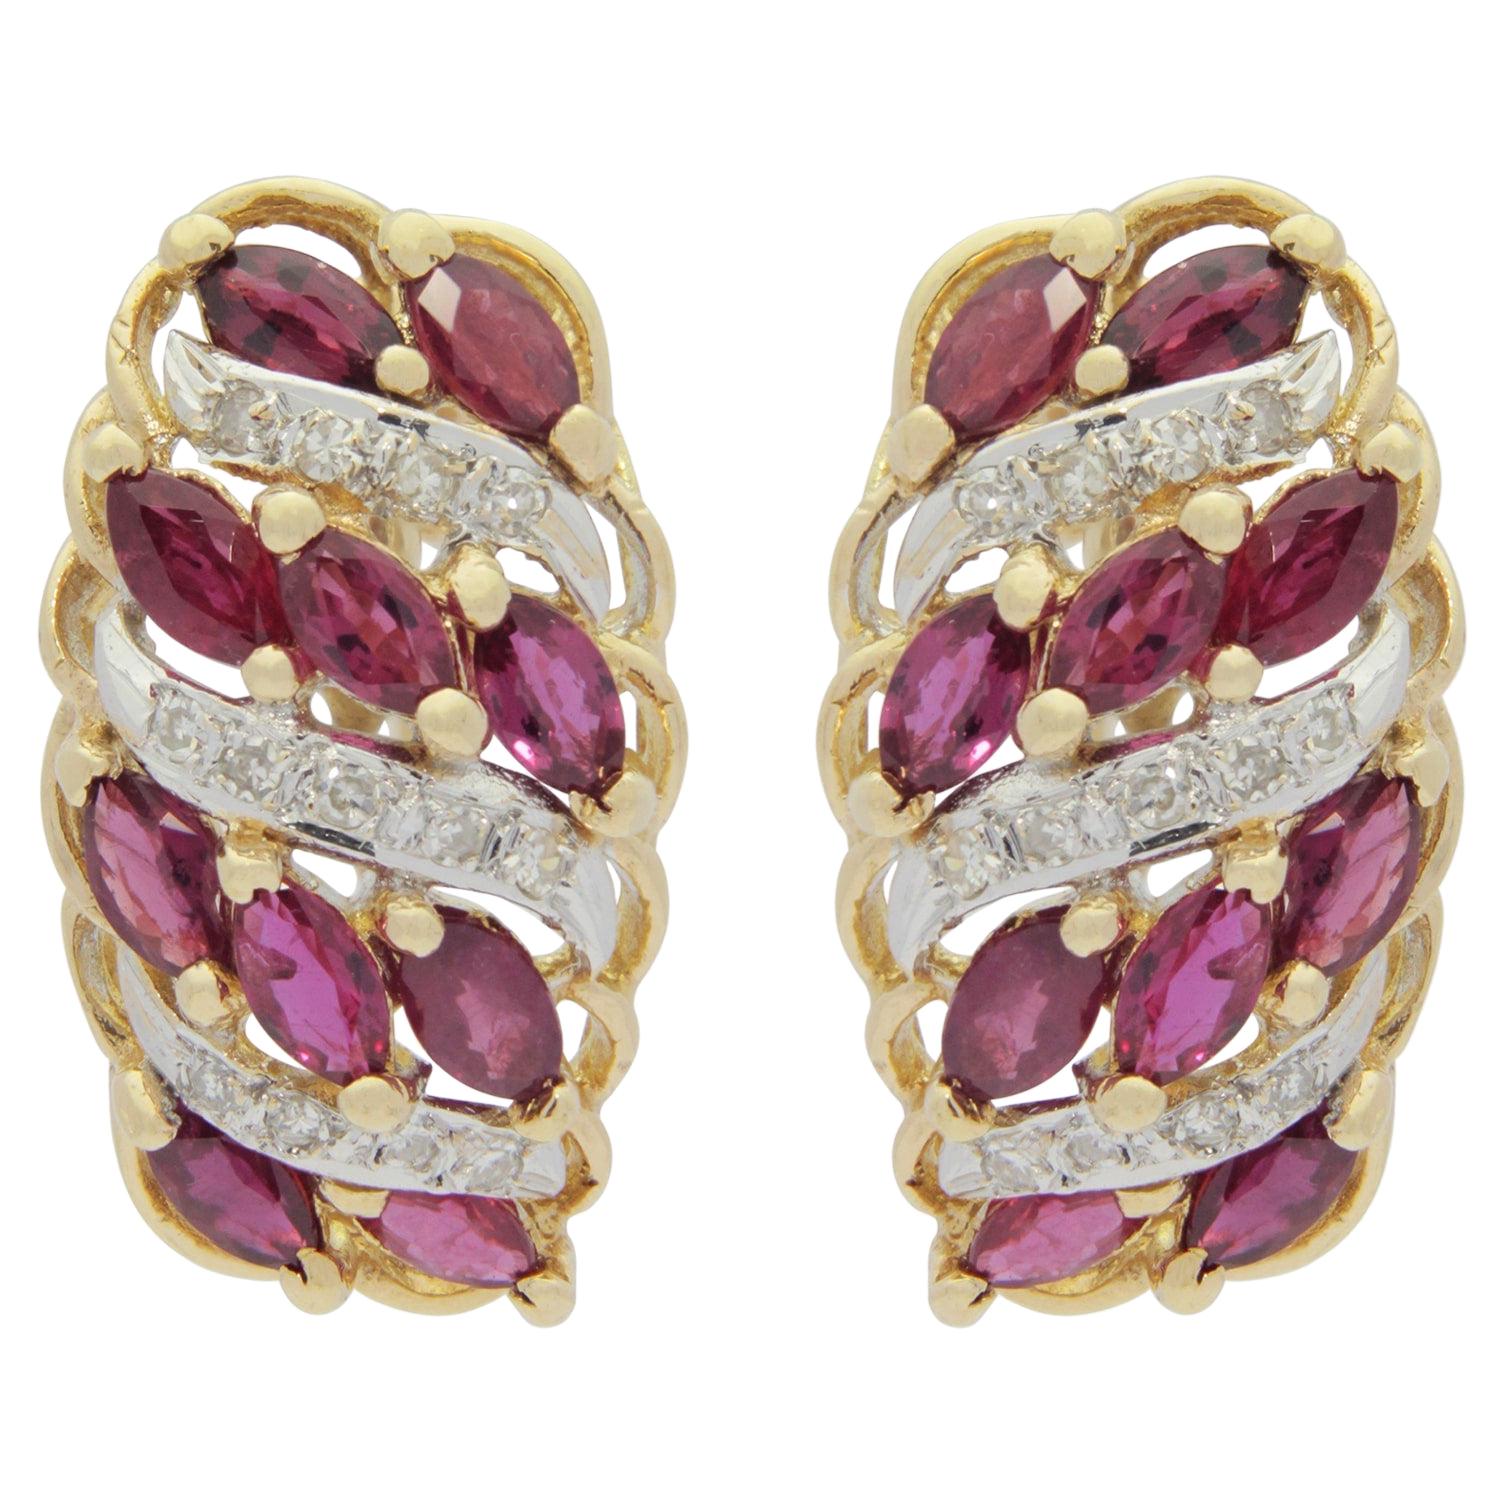 Retro Period, 14 Karat Gold, Ruby and Diamond Cocktail Earrings